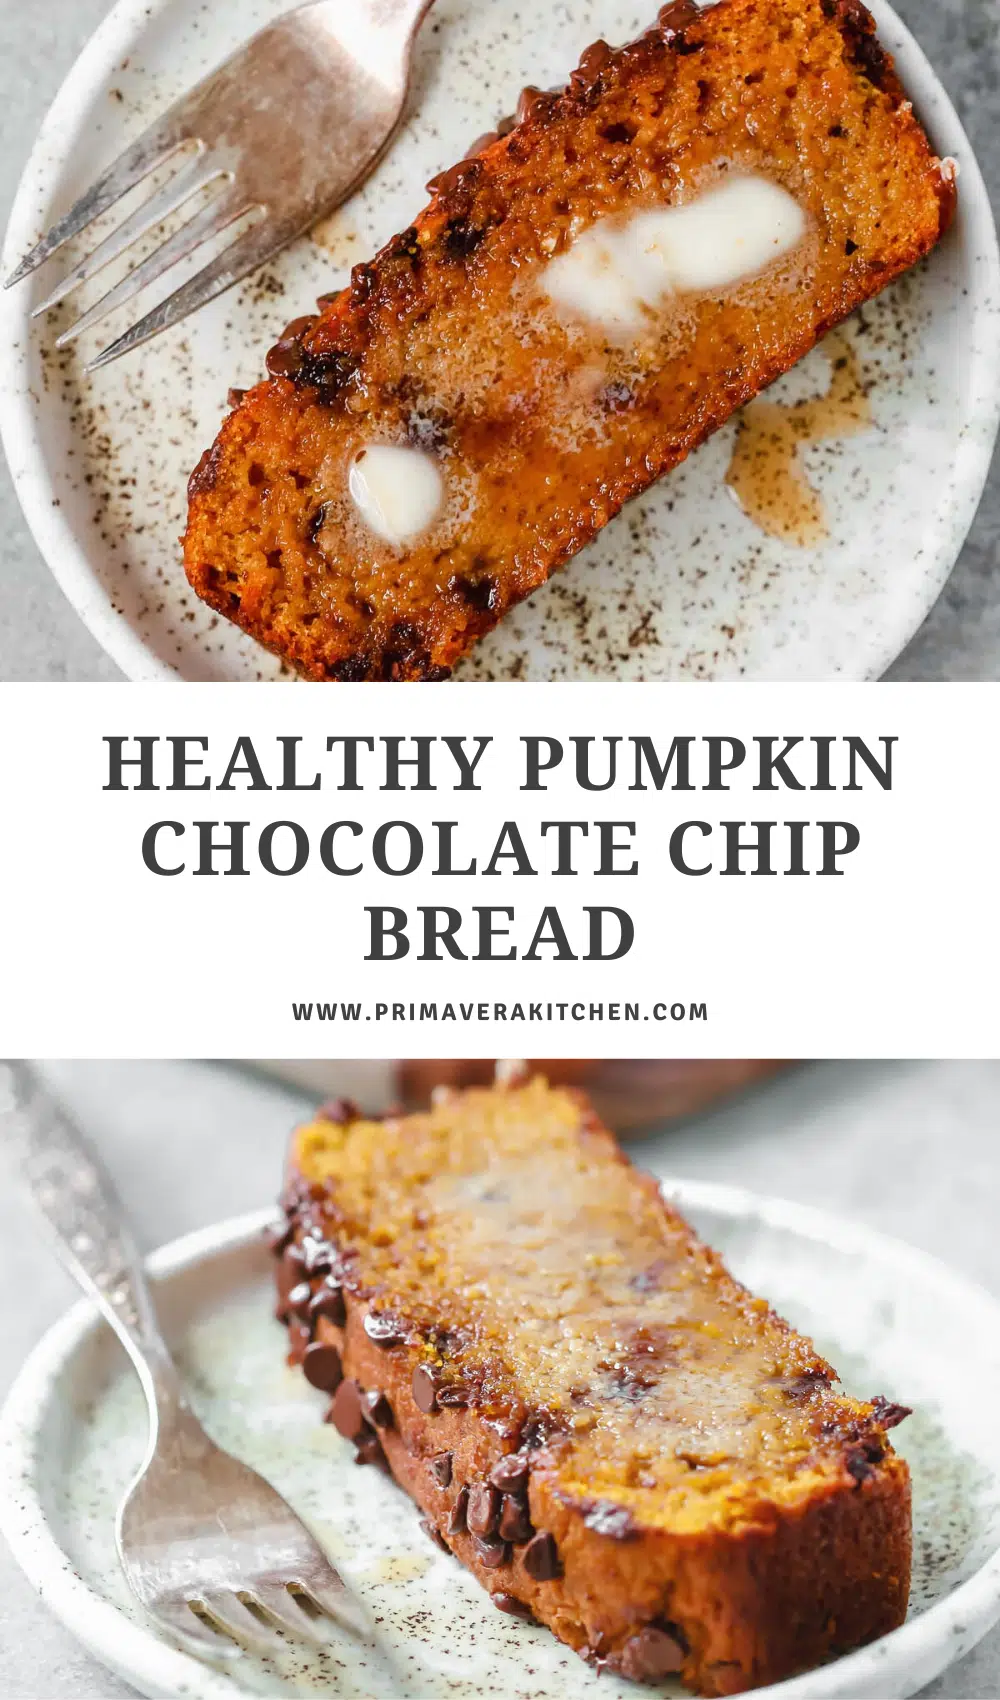 titled photo collage (and shown): Healthy Pumpkin Chocolate Chip Bread 